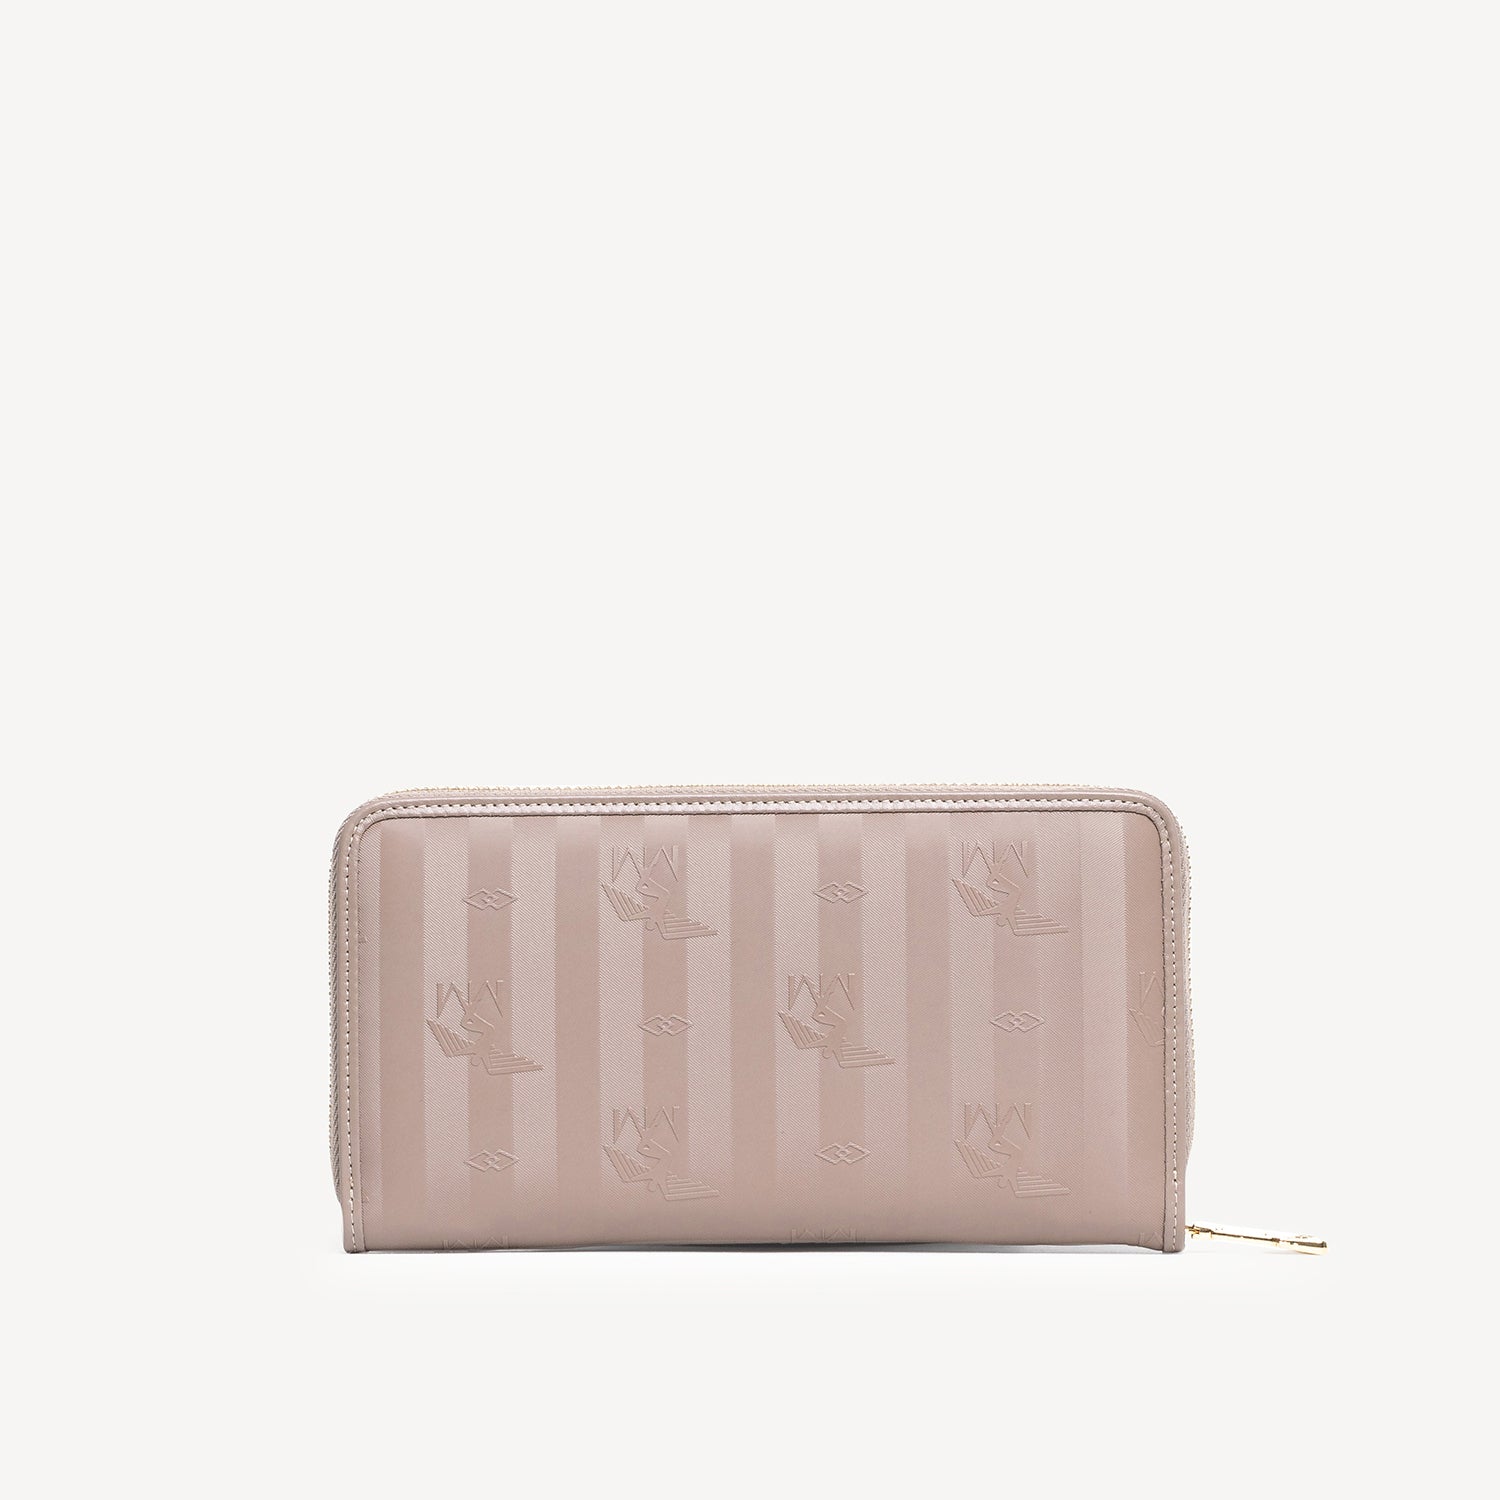 CLARIDEN | Wallet taupe/gold